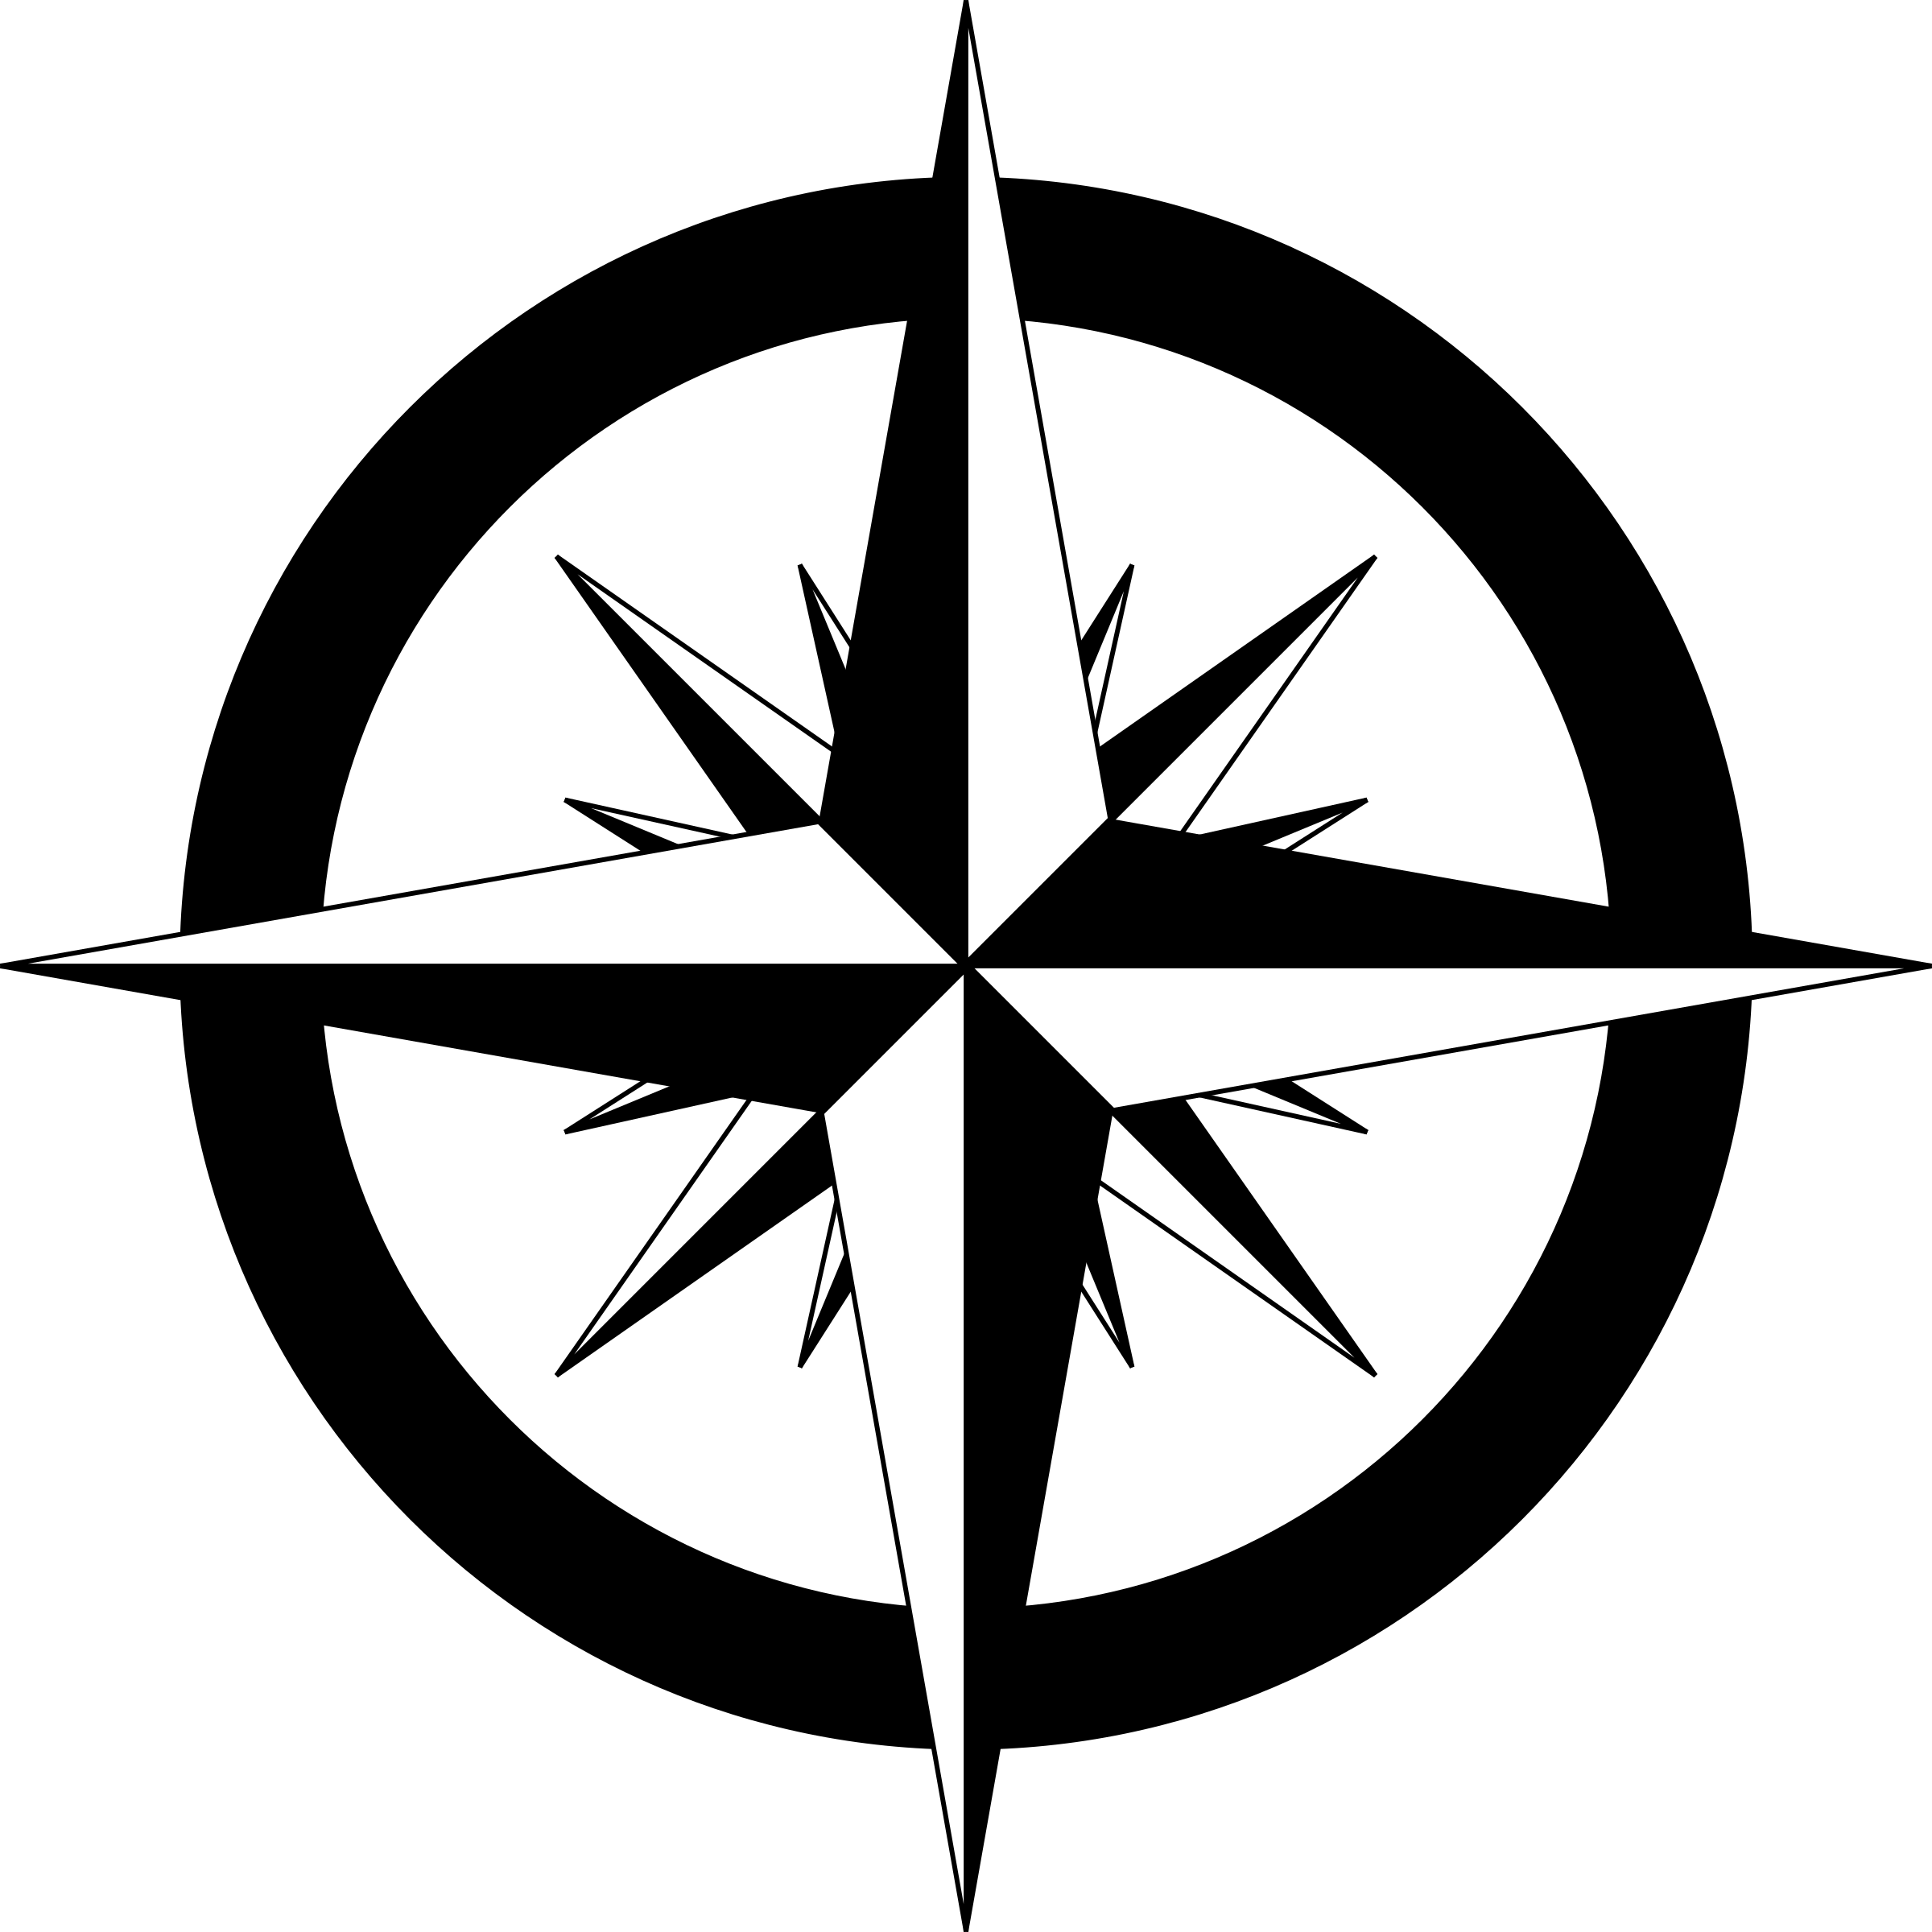 Medium Image - Compass Rose With Cardinal And Intermediate Directions (2400x2400)